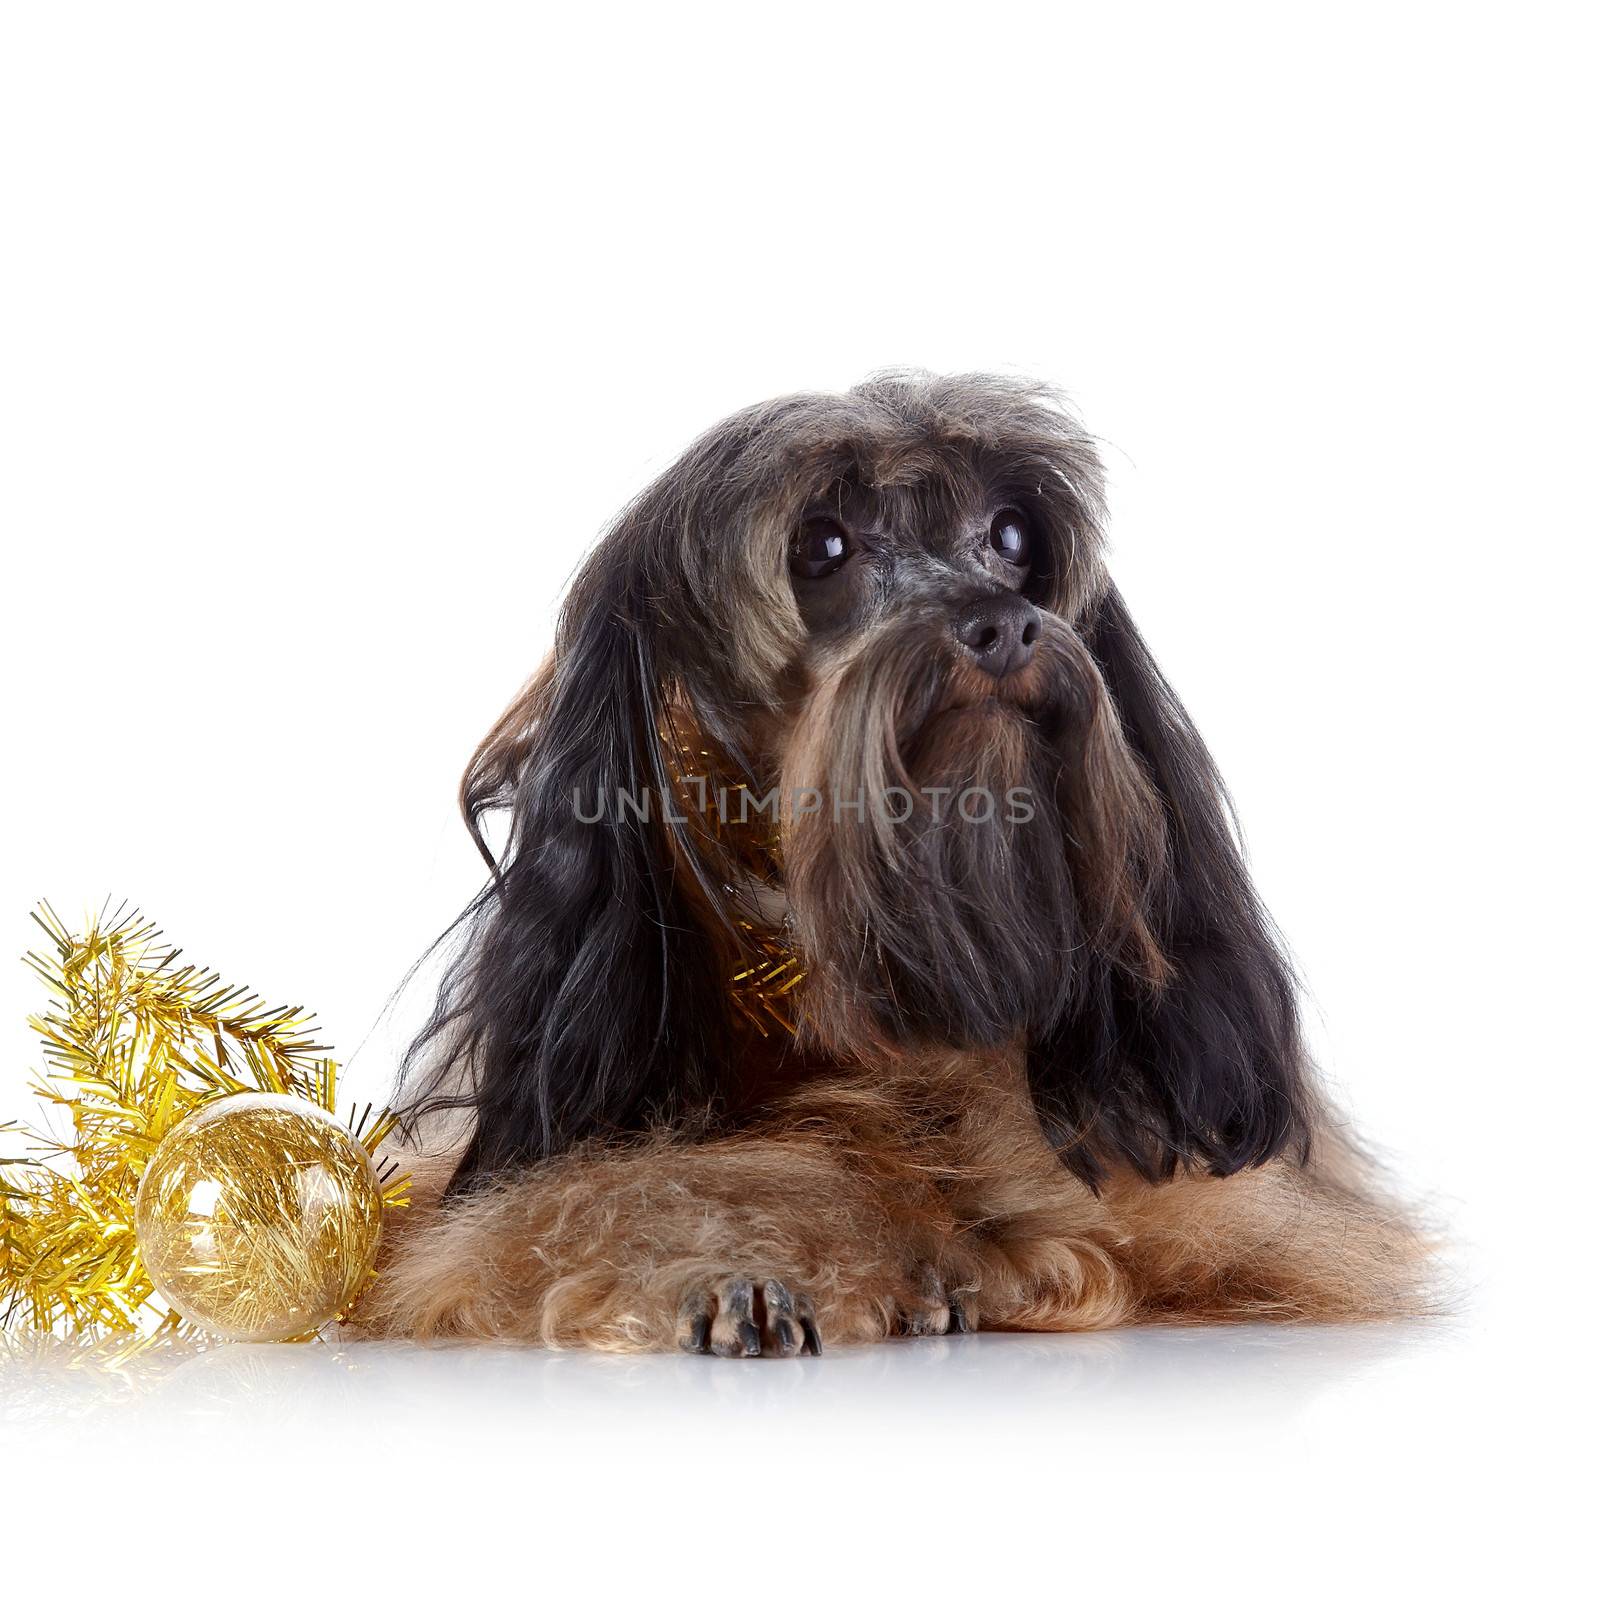 Decorative doggie with a New Year's toy. Decorative dog. Breed doggie Petersburg orchid.